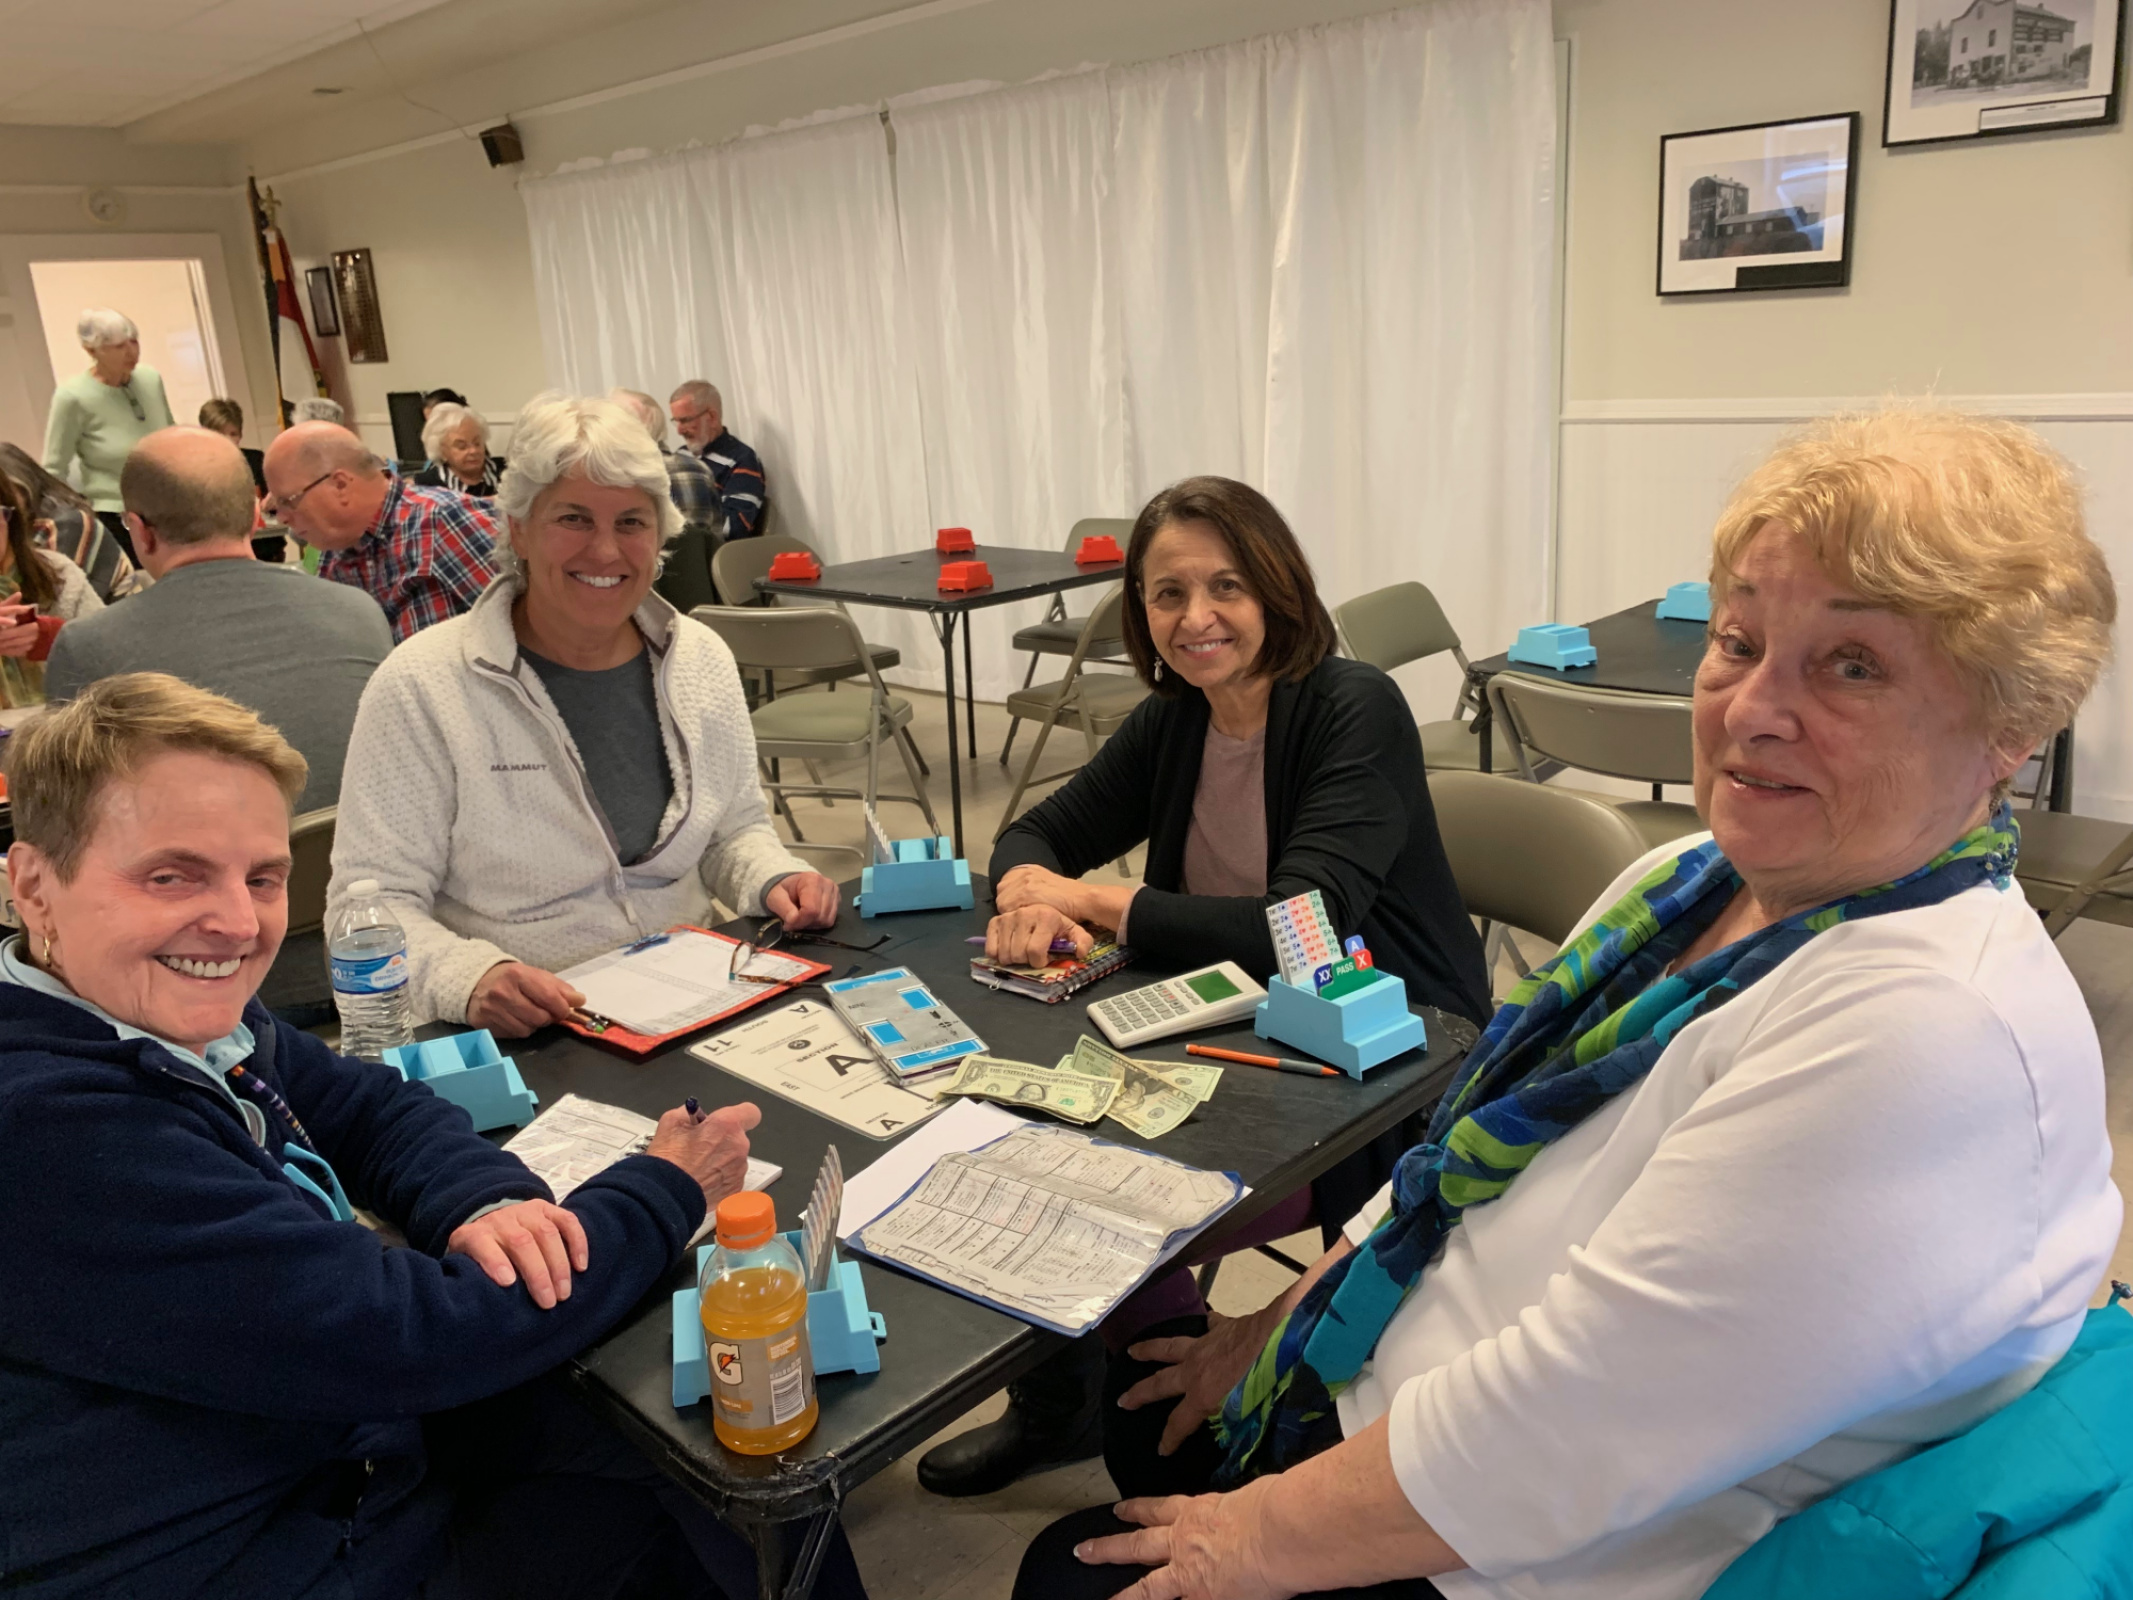 Last game at Niwot Grange April 30 2019, I'm the one sitting directly across from Miki. The other two ladies are Lisa Geiger and Judith Hardie (I hope that's  her name!)) 